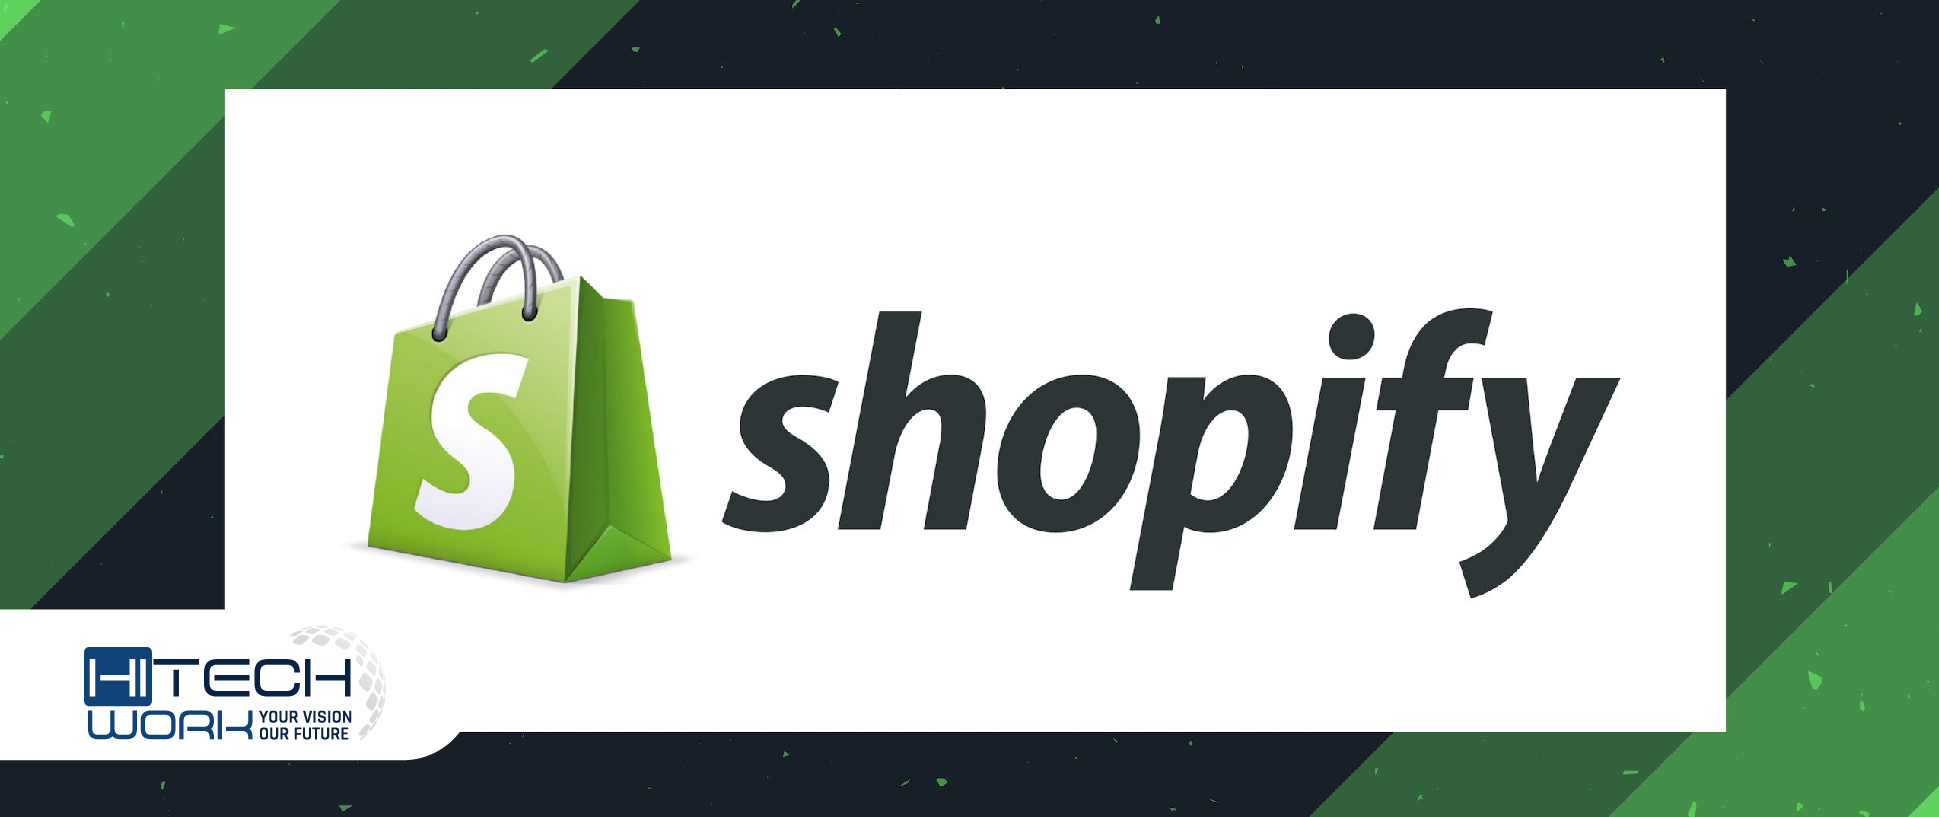 How much does Shopify take per sale